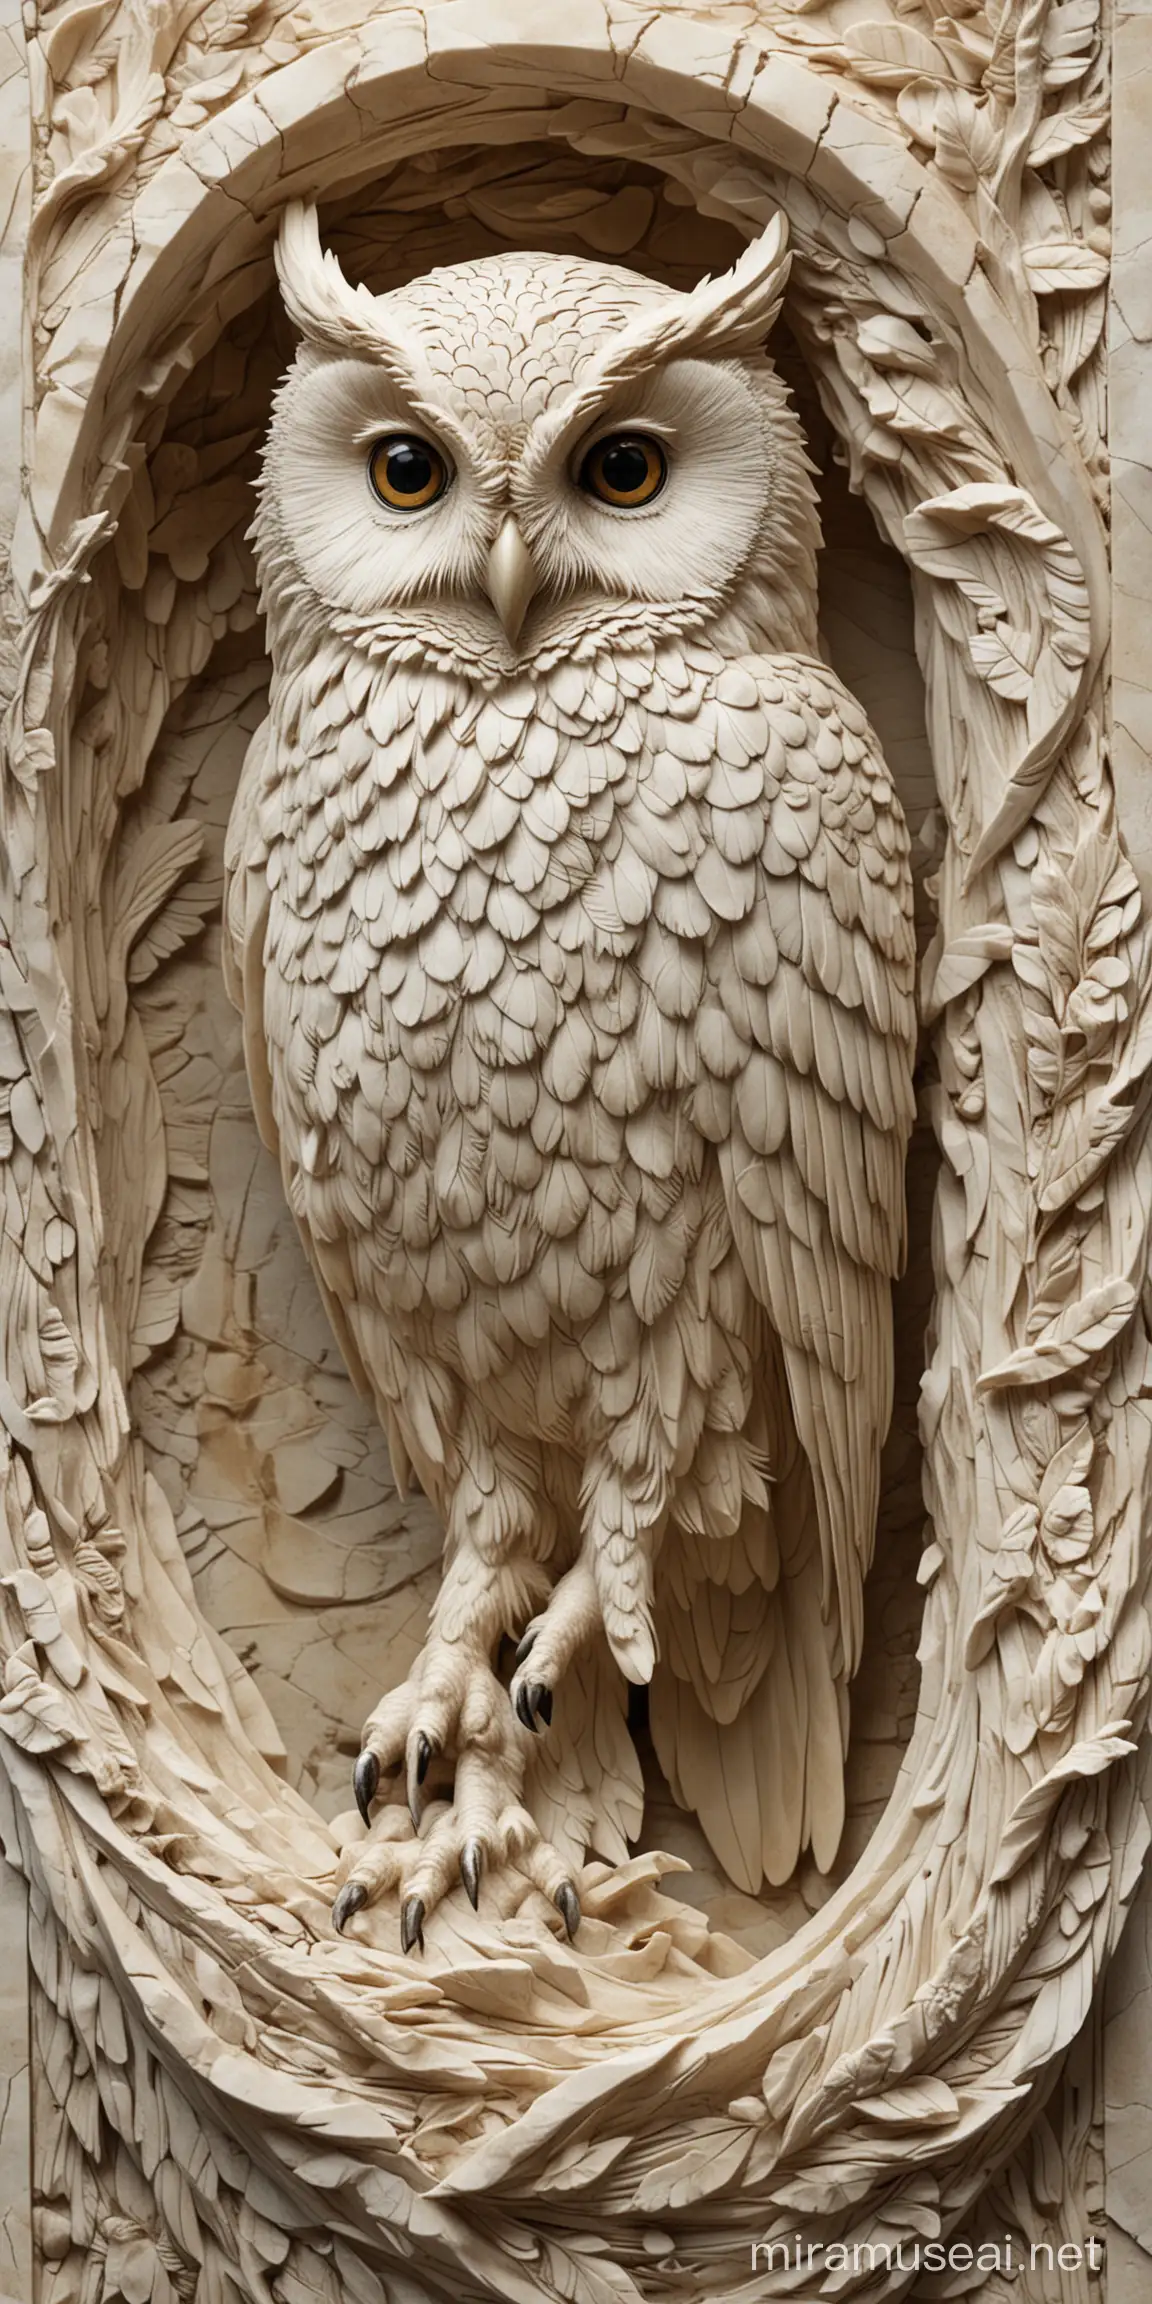 carved in alabaster, owl, realistic, sprial, 2d, textured background, no color

